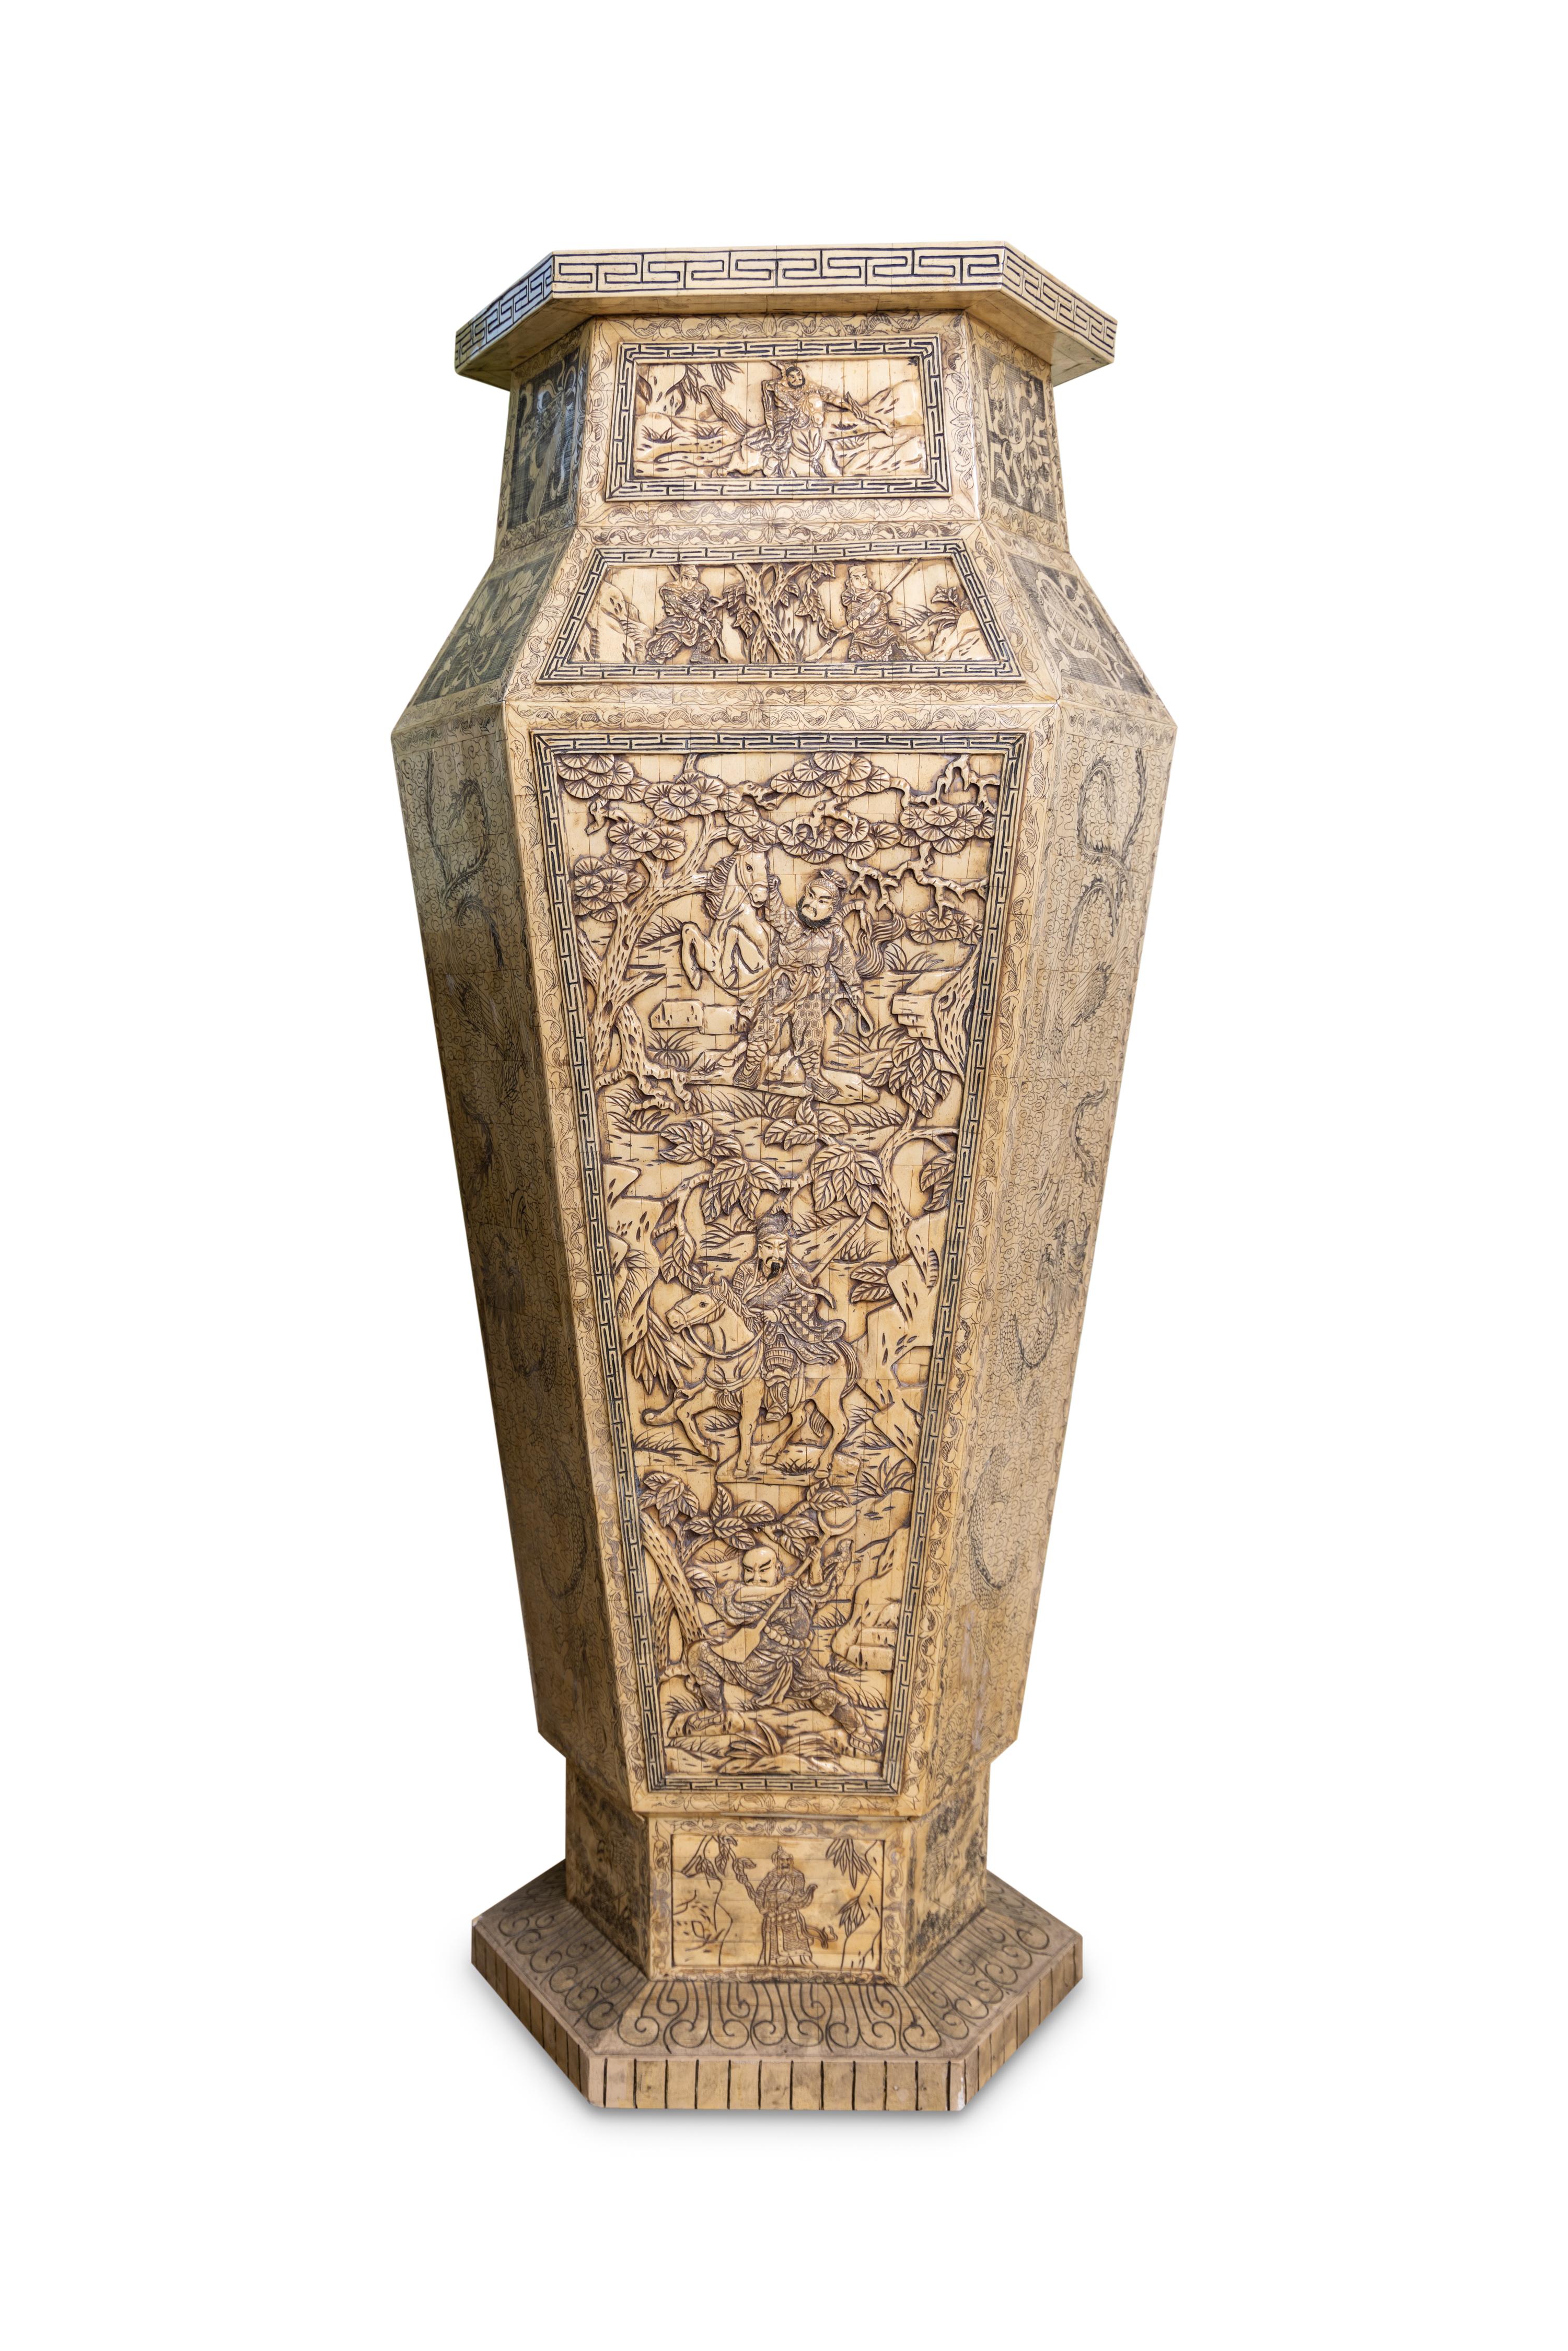 Pair of Monumental Oversized Bone Pedestals With Intricate Detail Design For Sale 1